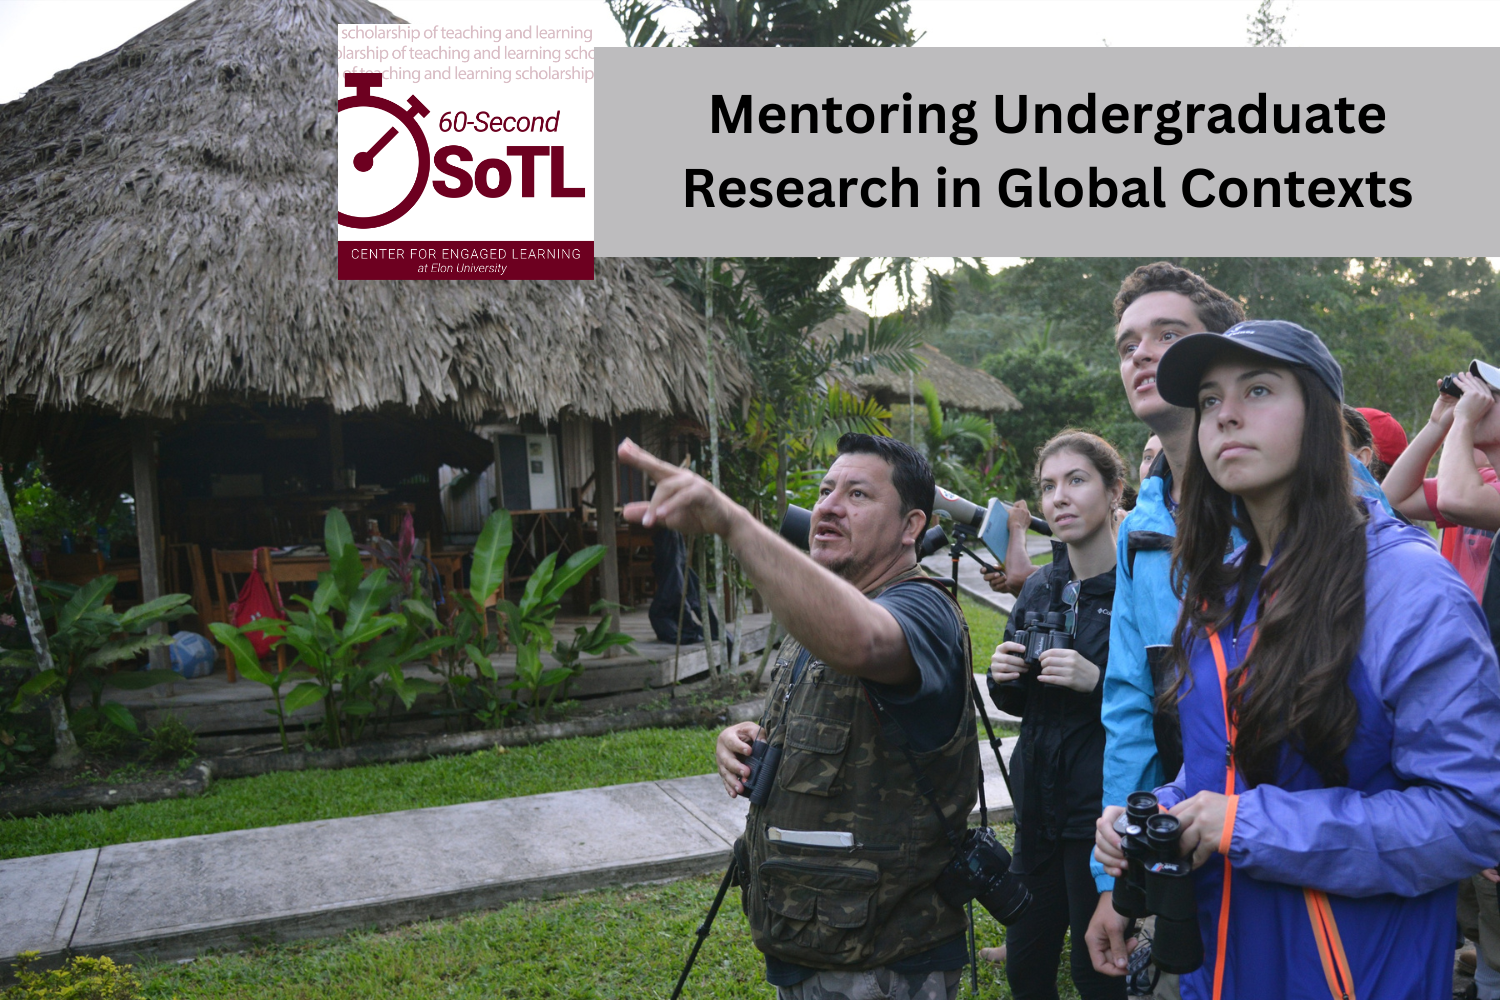 A group of people stand in front of a house with a grass roof. One person is pointing to something ahead of the group but out of frame. An overlay reads, "Mentoring Undergraduate Research in Global Contexts."